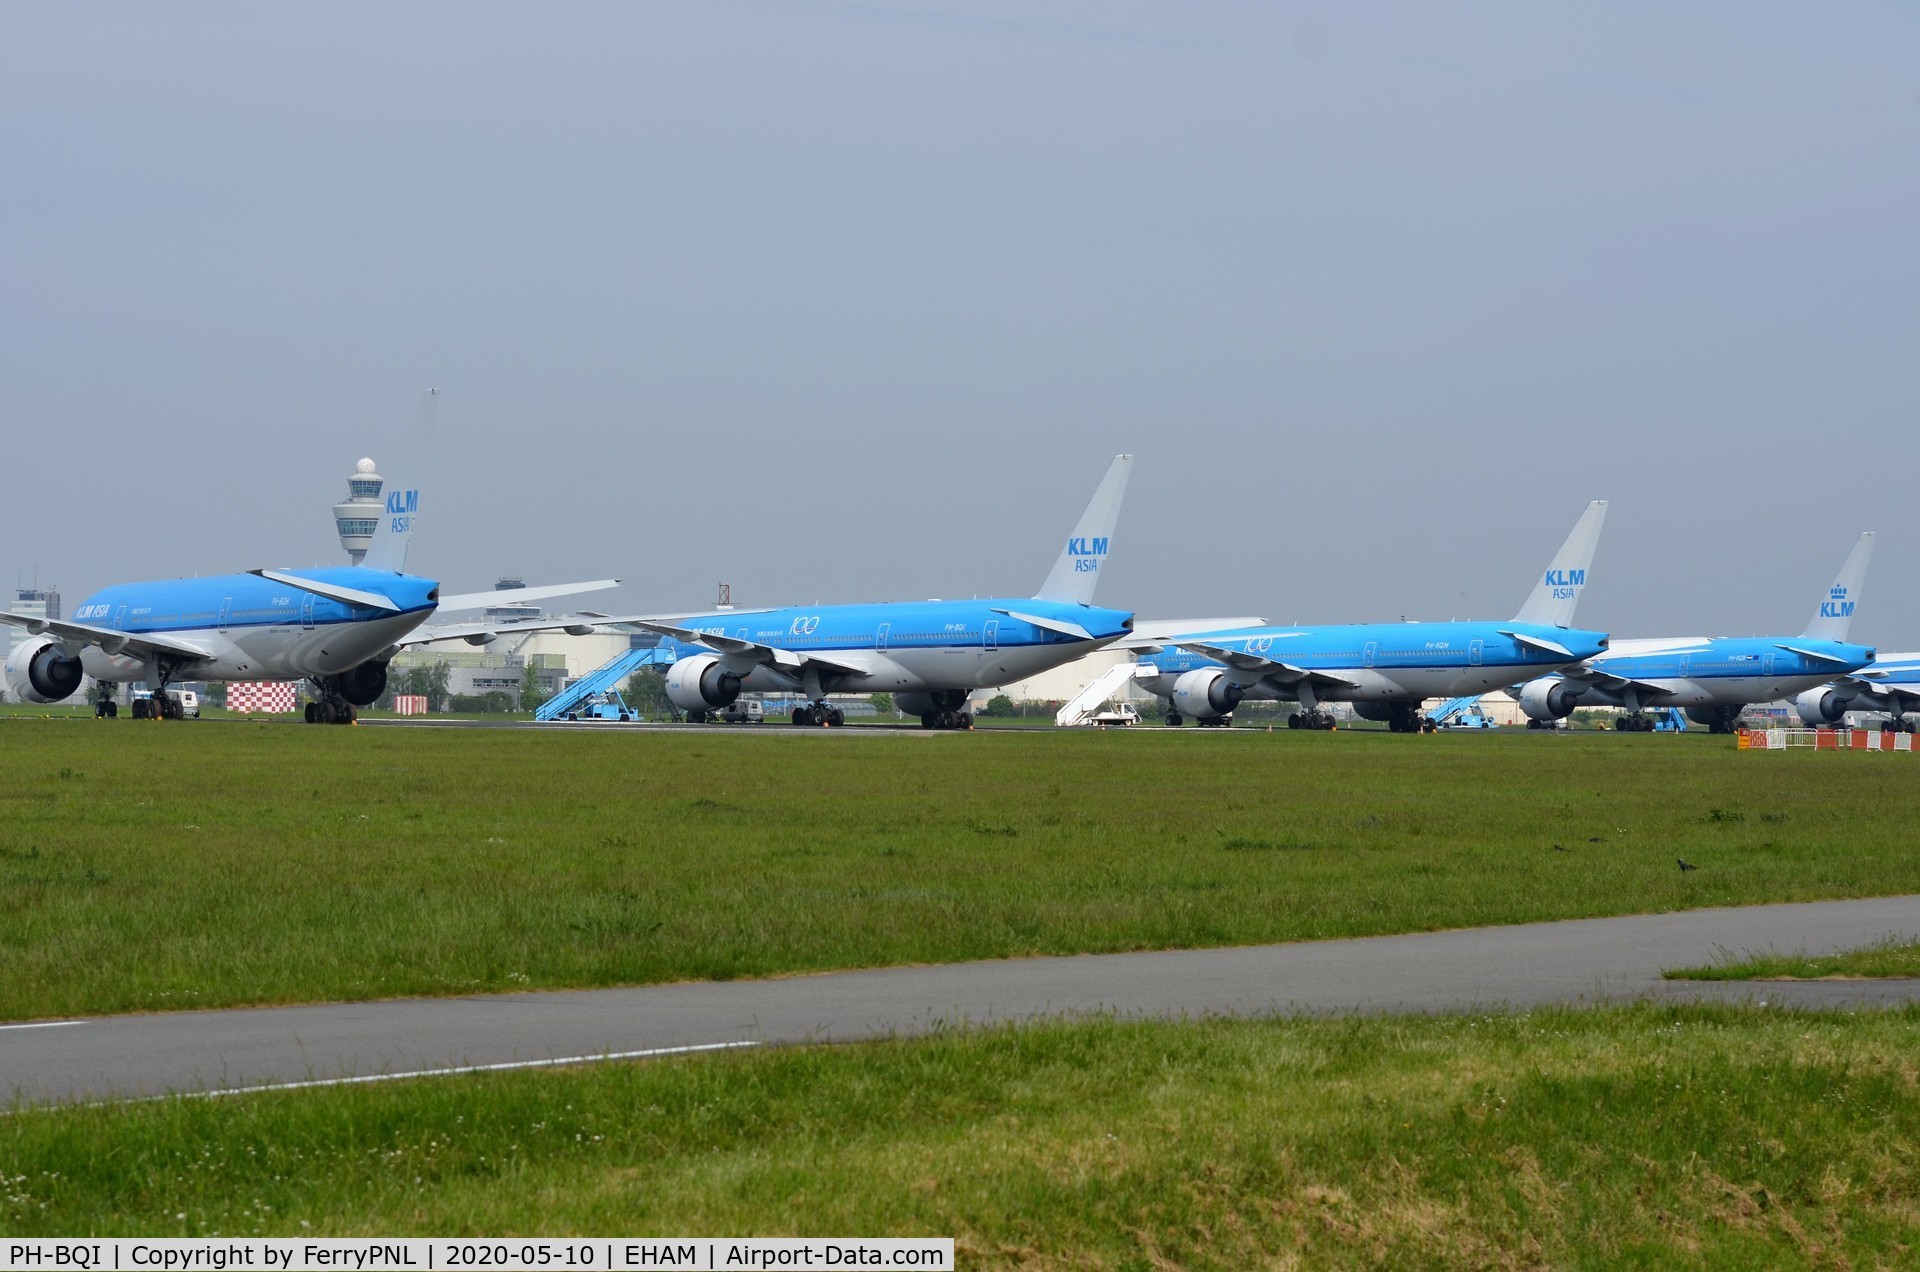 PH-BQI, 2004 Boeing 777-206/ER C/N 33714, 5 KLM B772's stored on a runway at AMS during Covid 19 crisis.